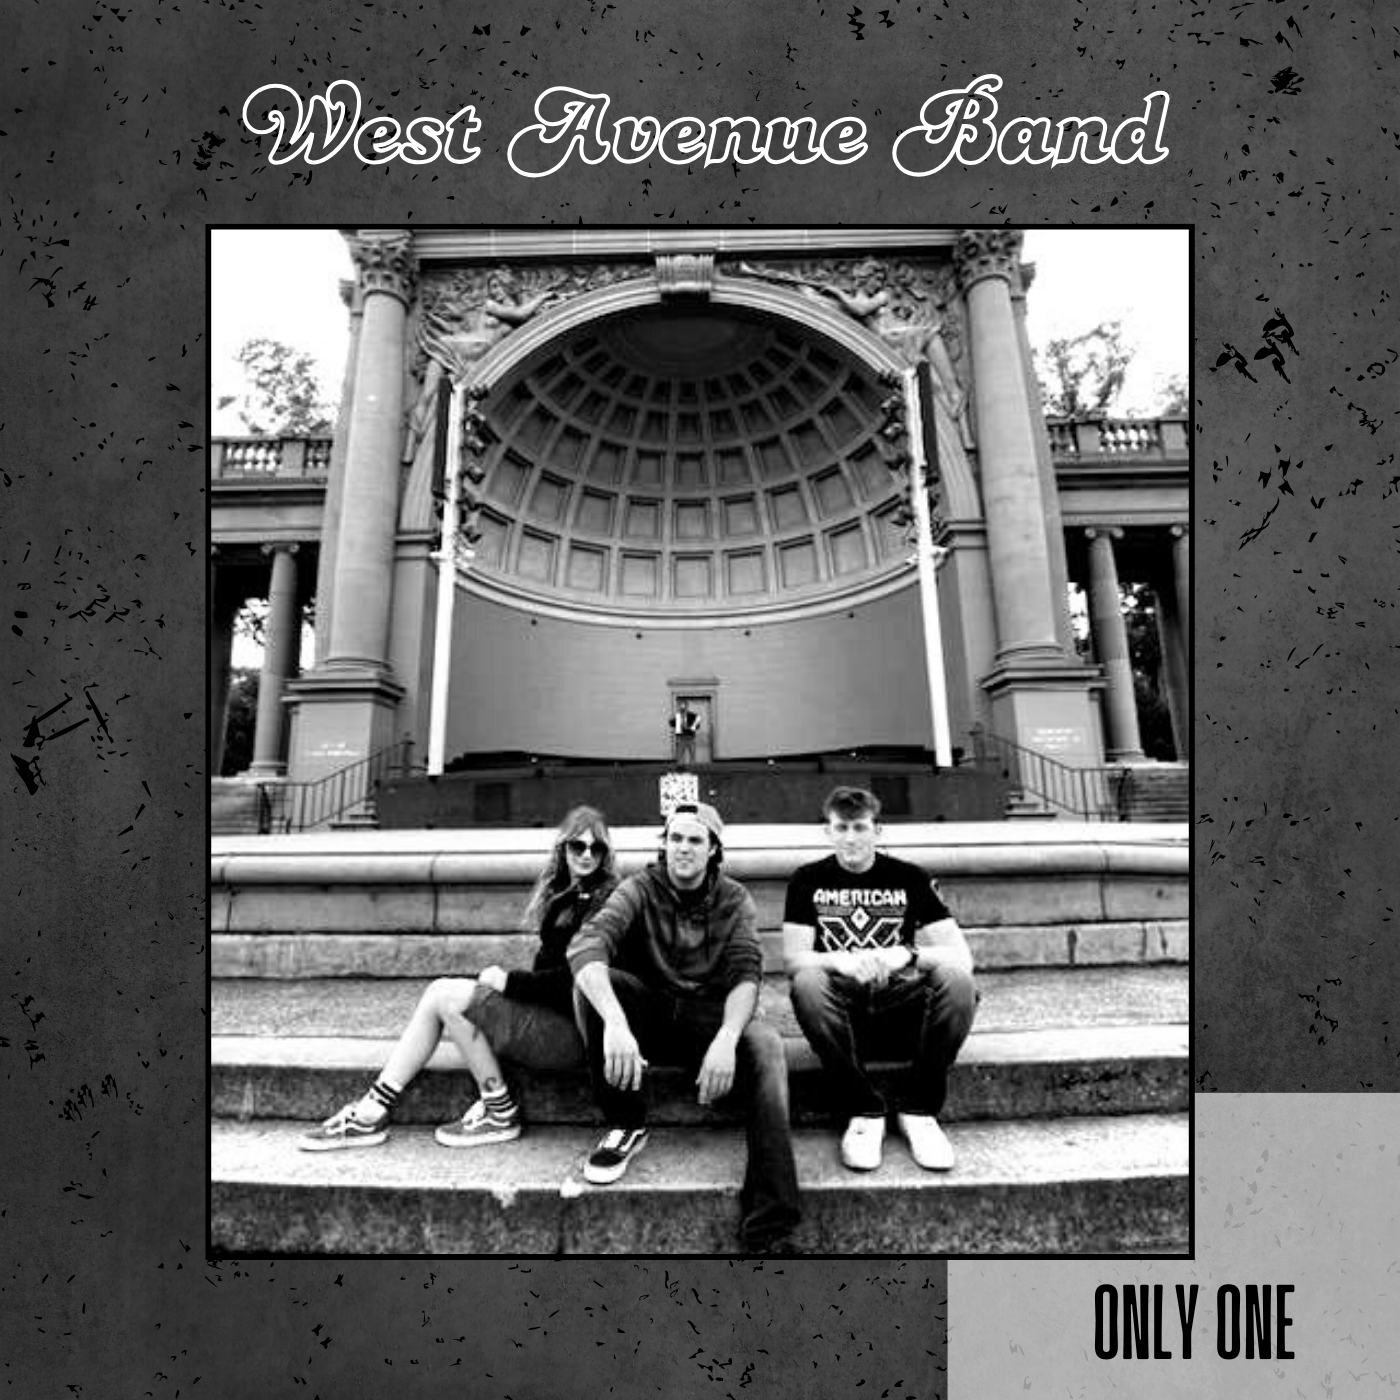 West Avenue Band Single “Only One” Release Party 2/2/24 At Merri Cassidy’s in Fifield, WI 7-9 PM